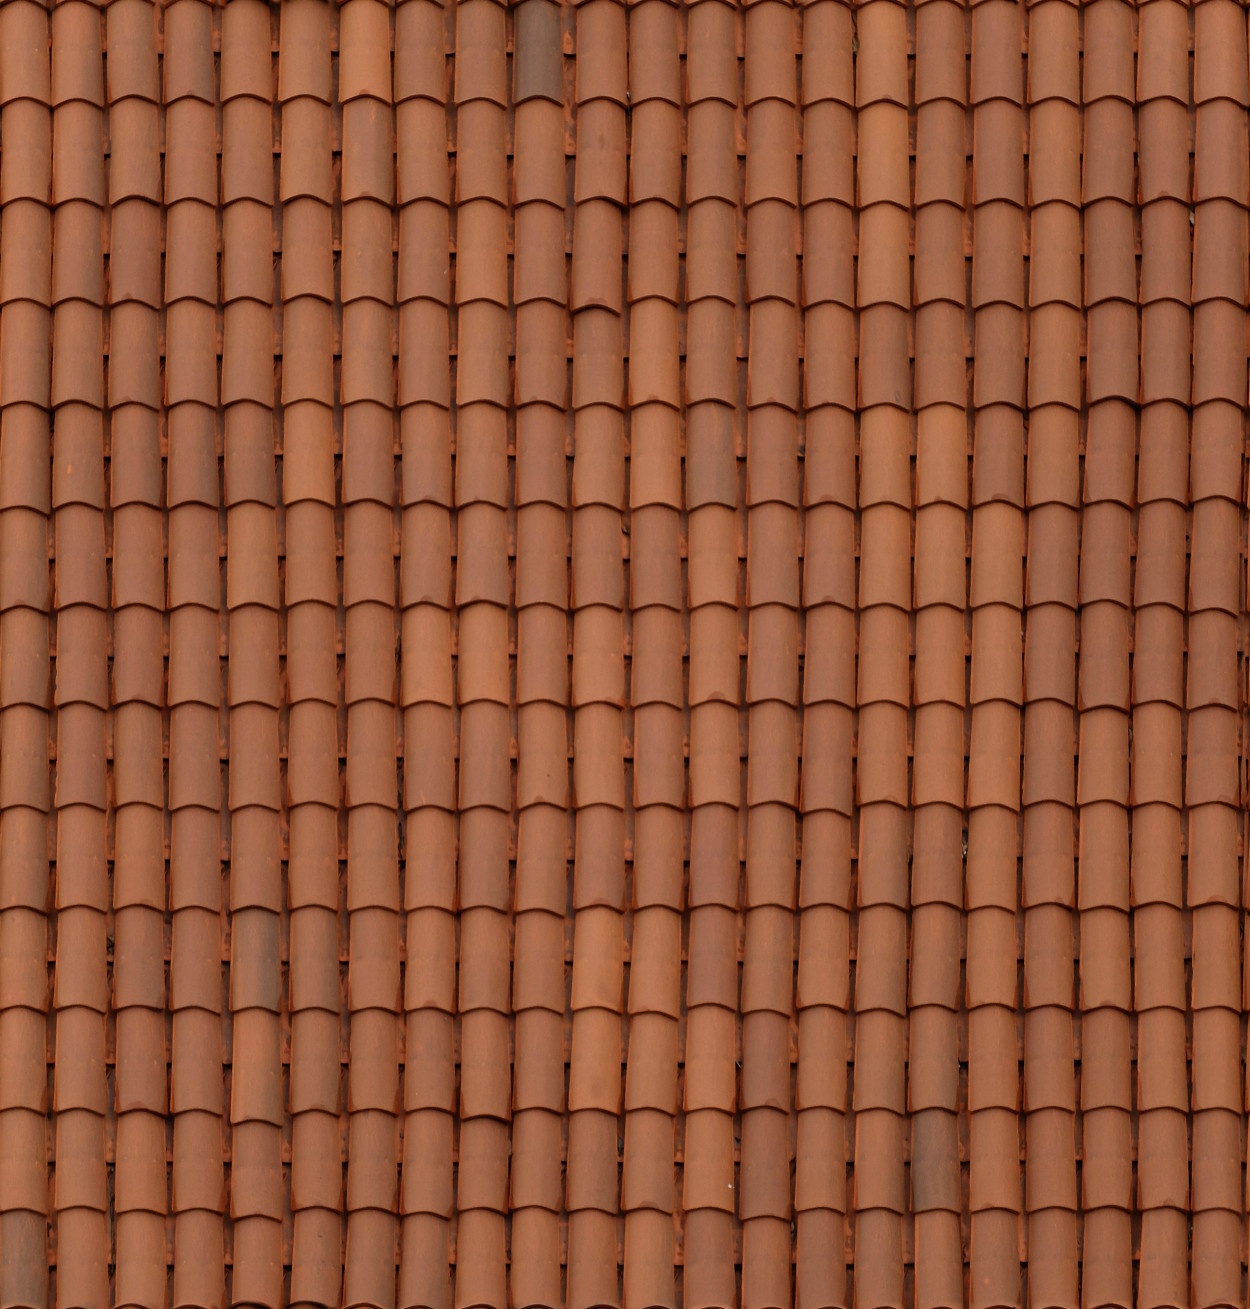 A seamless ceramic roof tiles texture for use in architectural drawings and 3D models